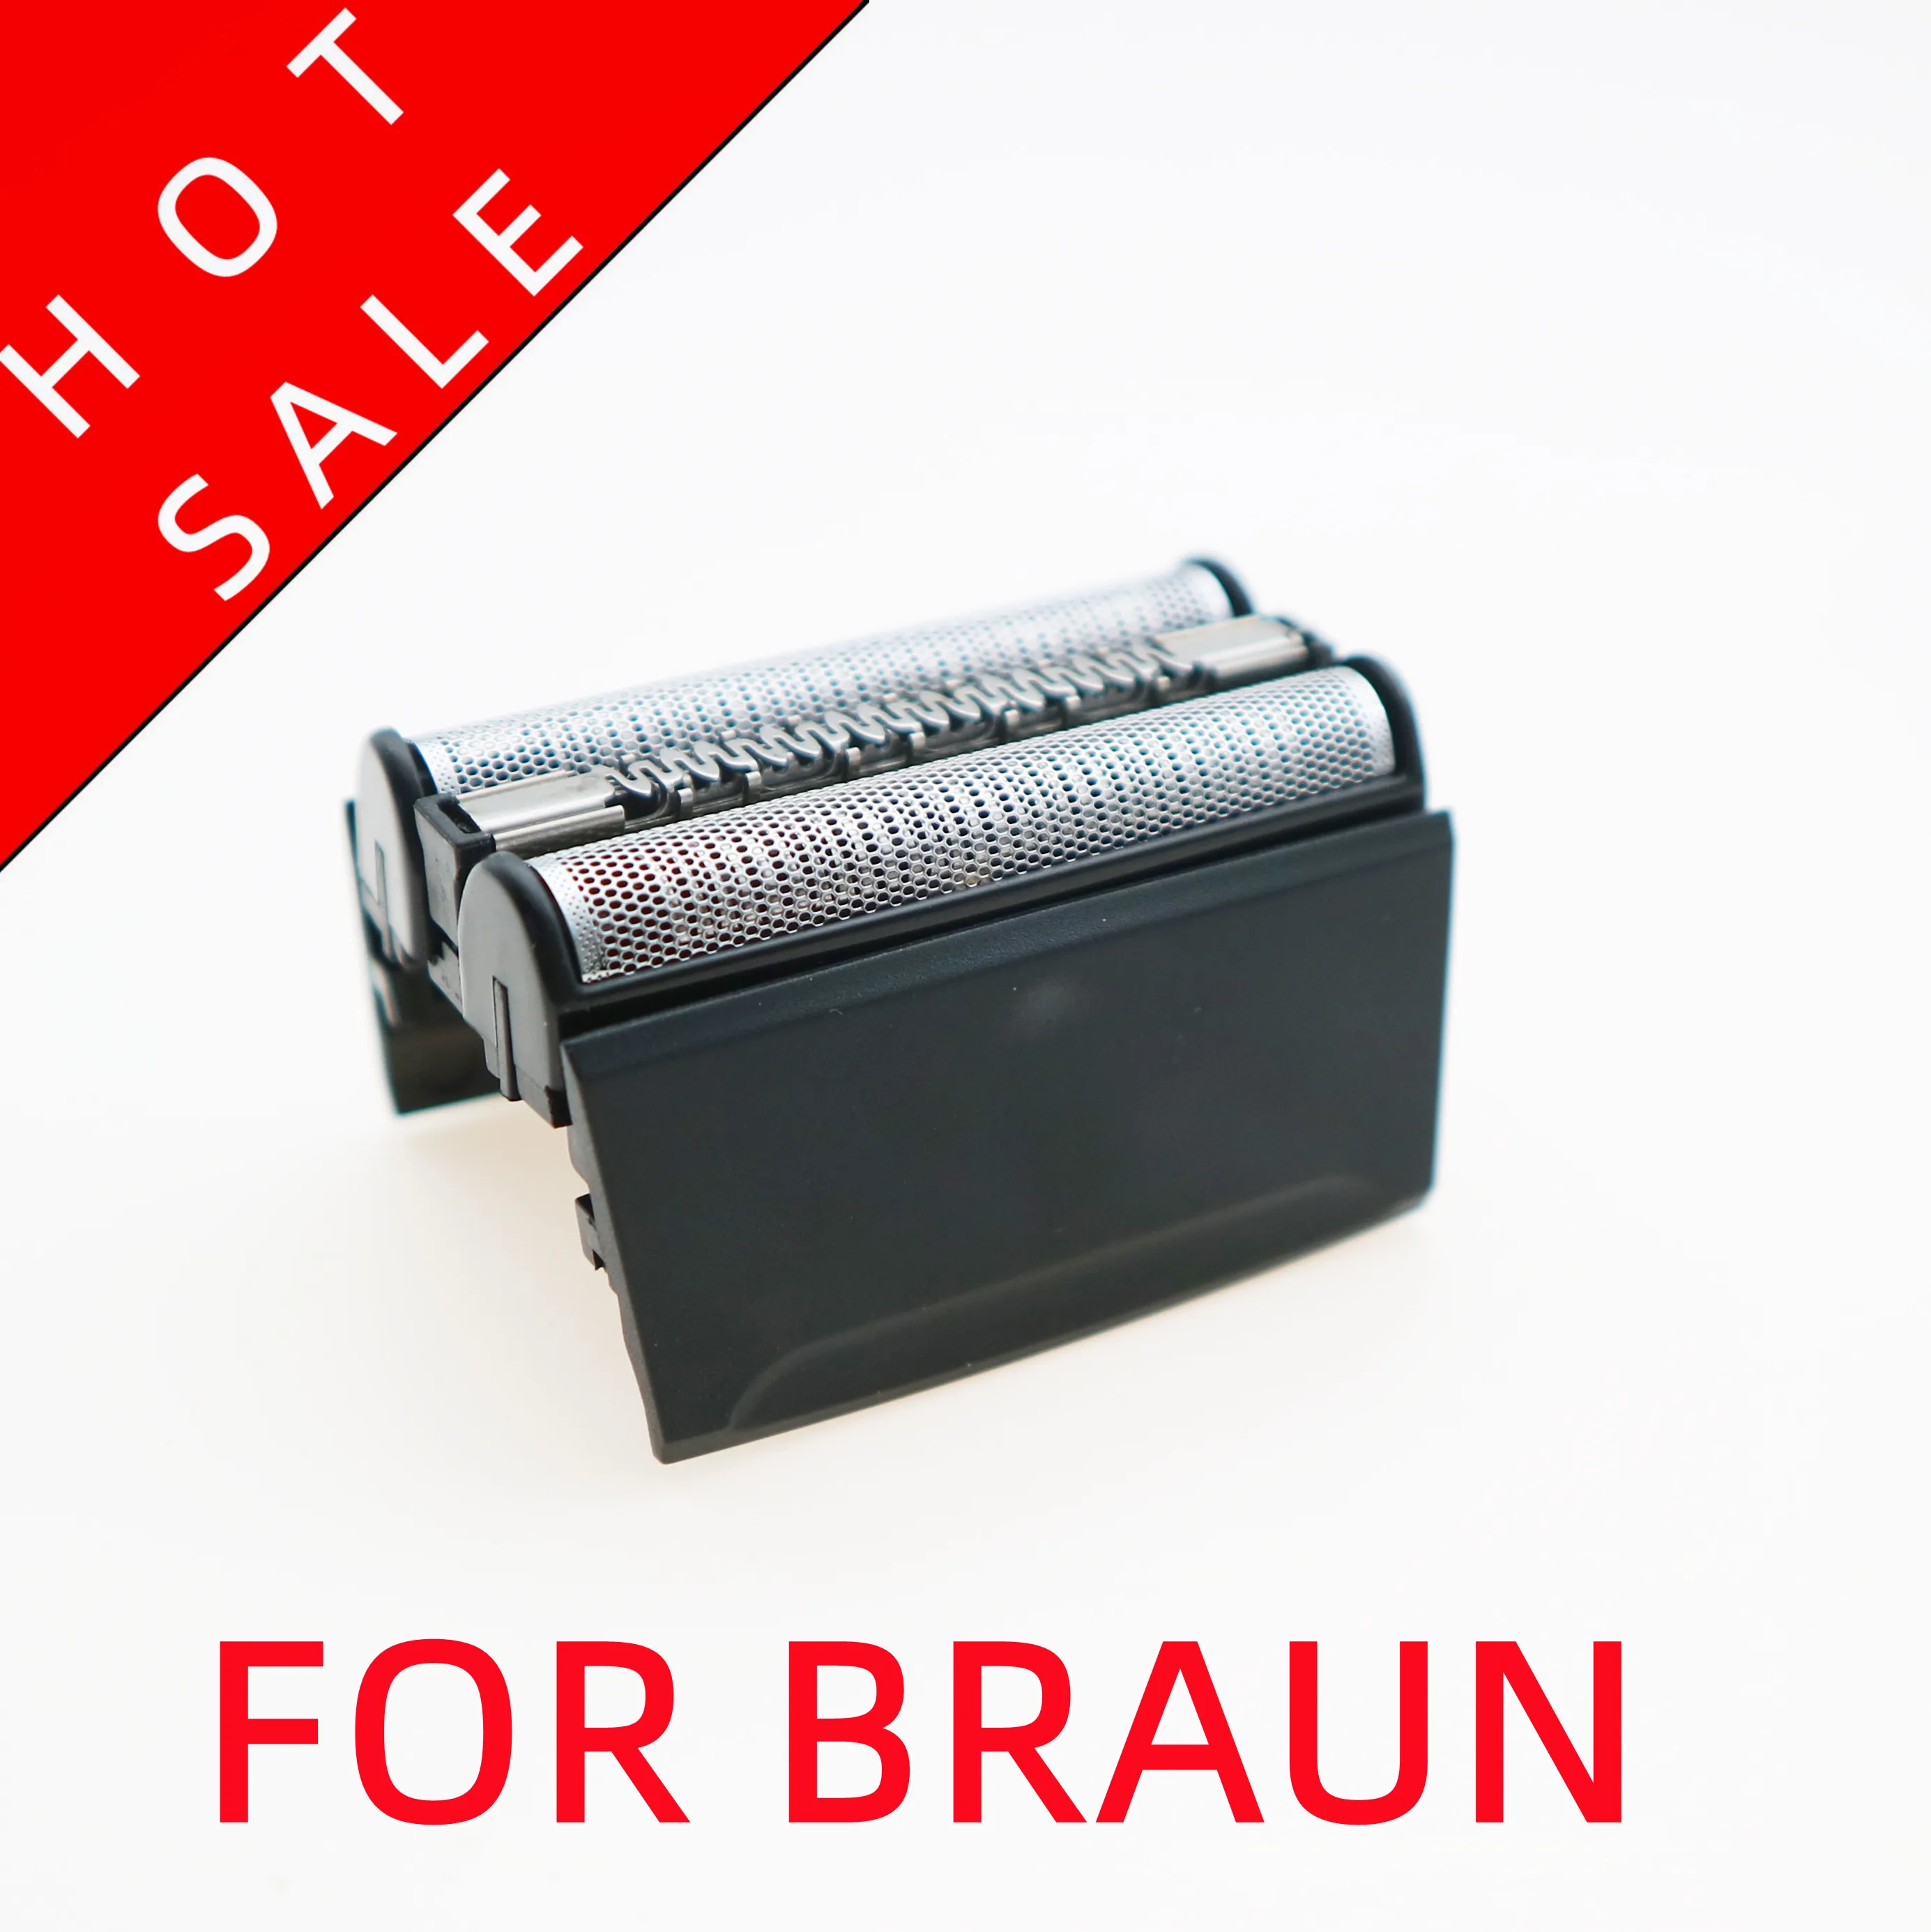 Replacement Shaver Heads & Foil Heads 52B for Braun 5 Series 5020S 5030S 5040S 5050S 5050cc 5070cc 5090cc